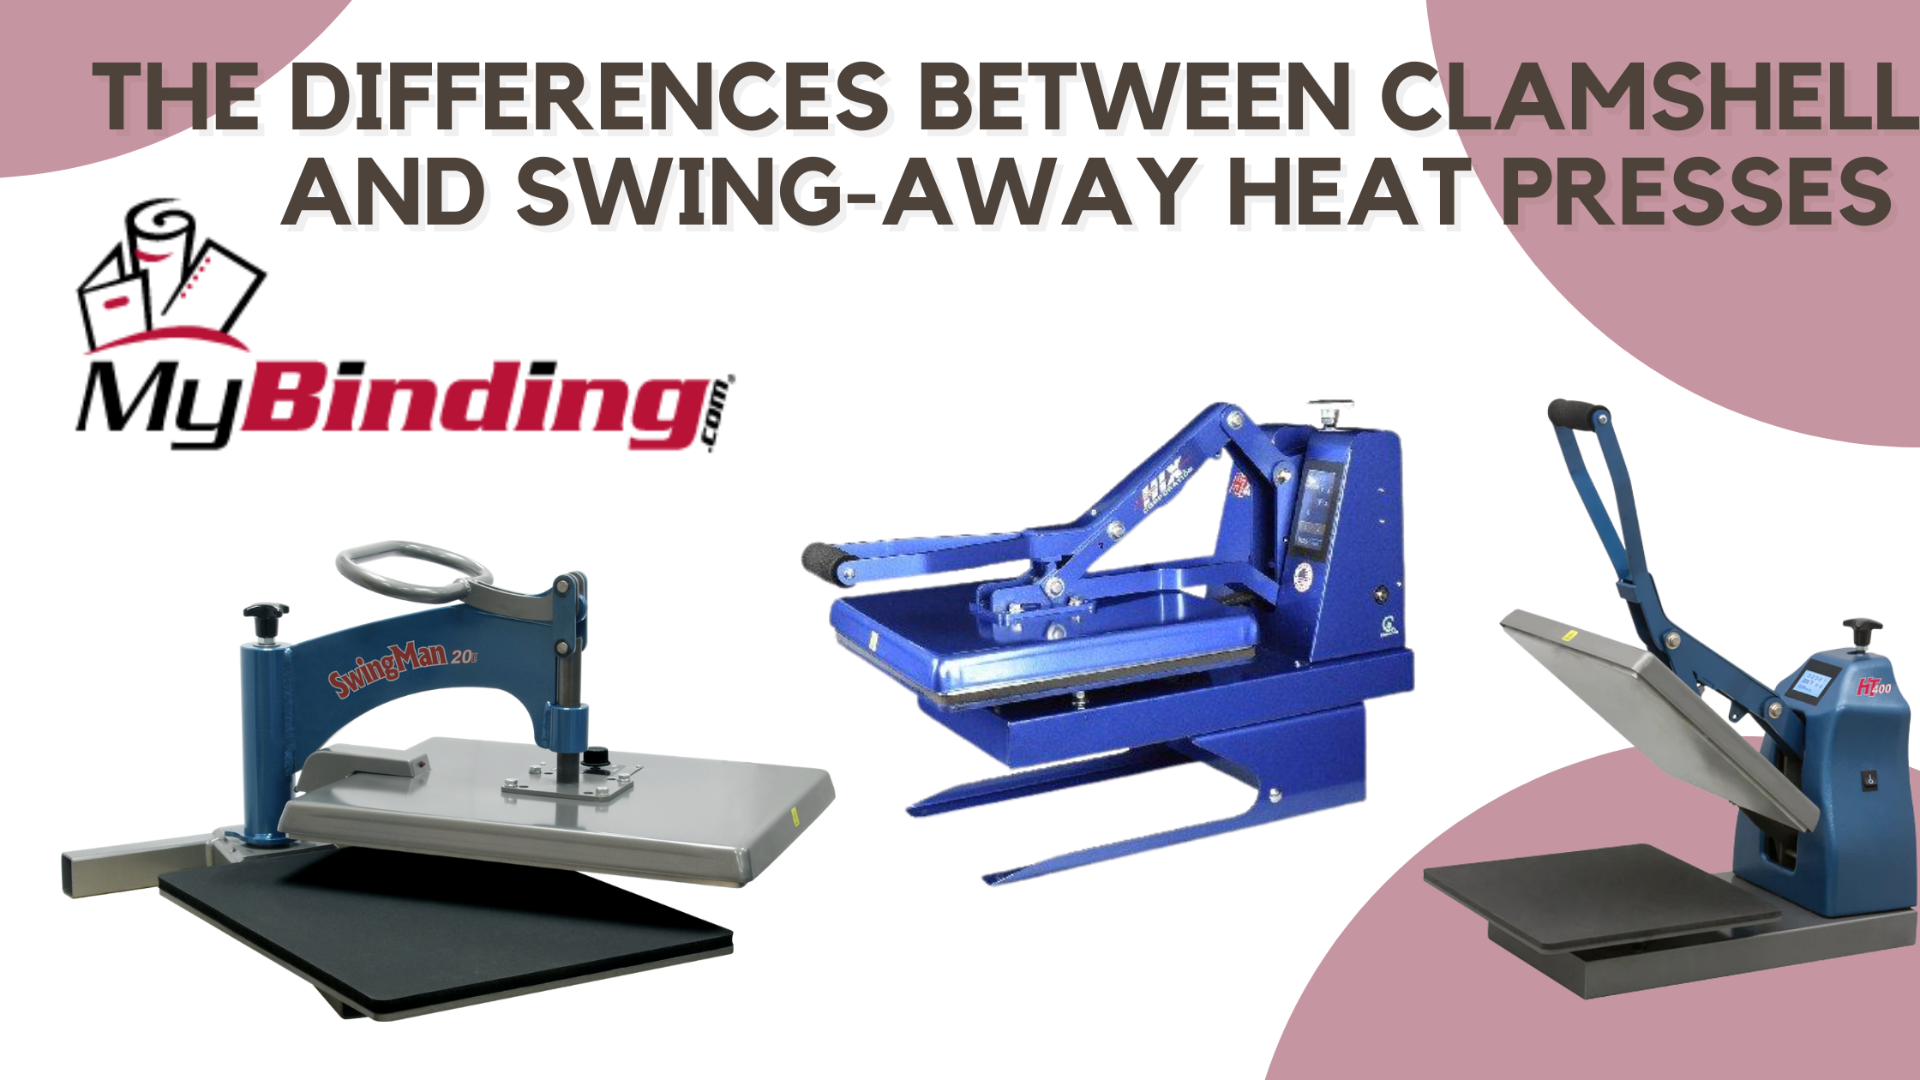 Differences between Clamshell and Swing Away Heat Presses